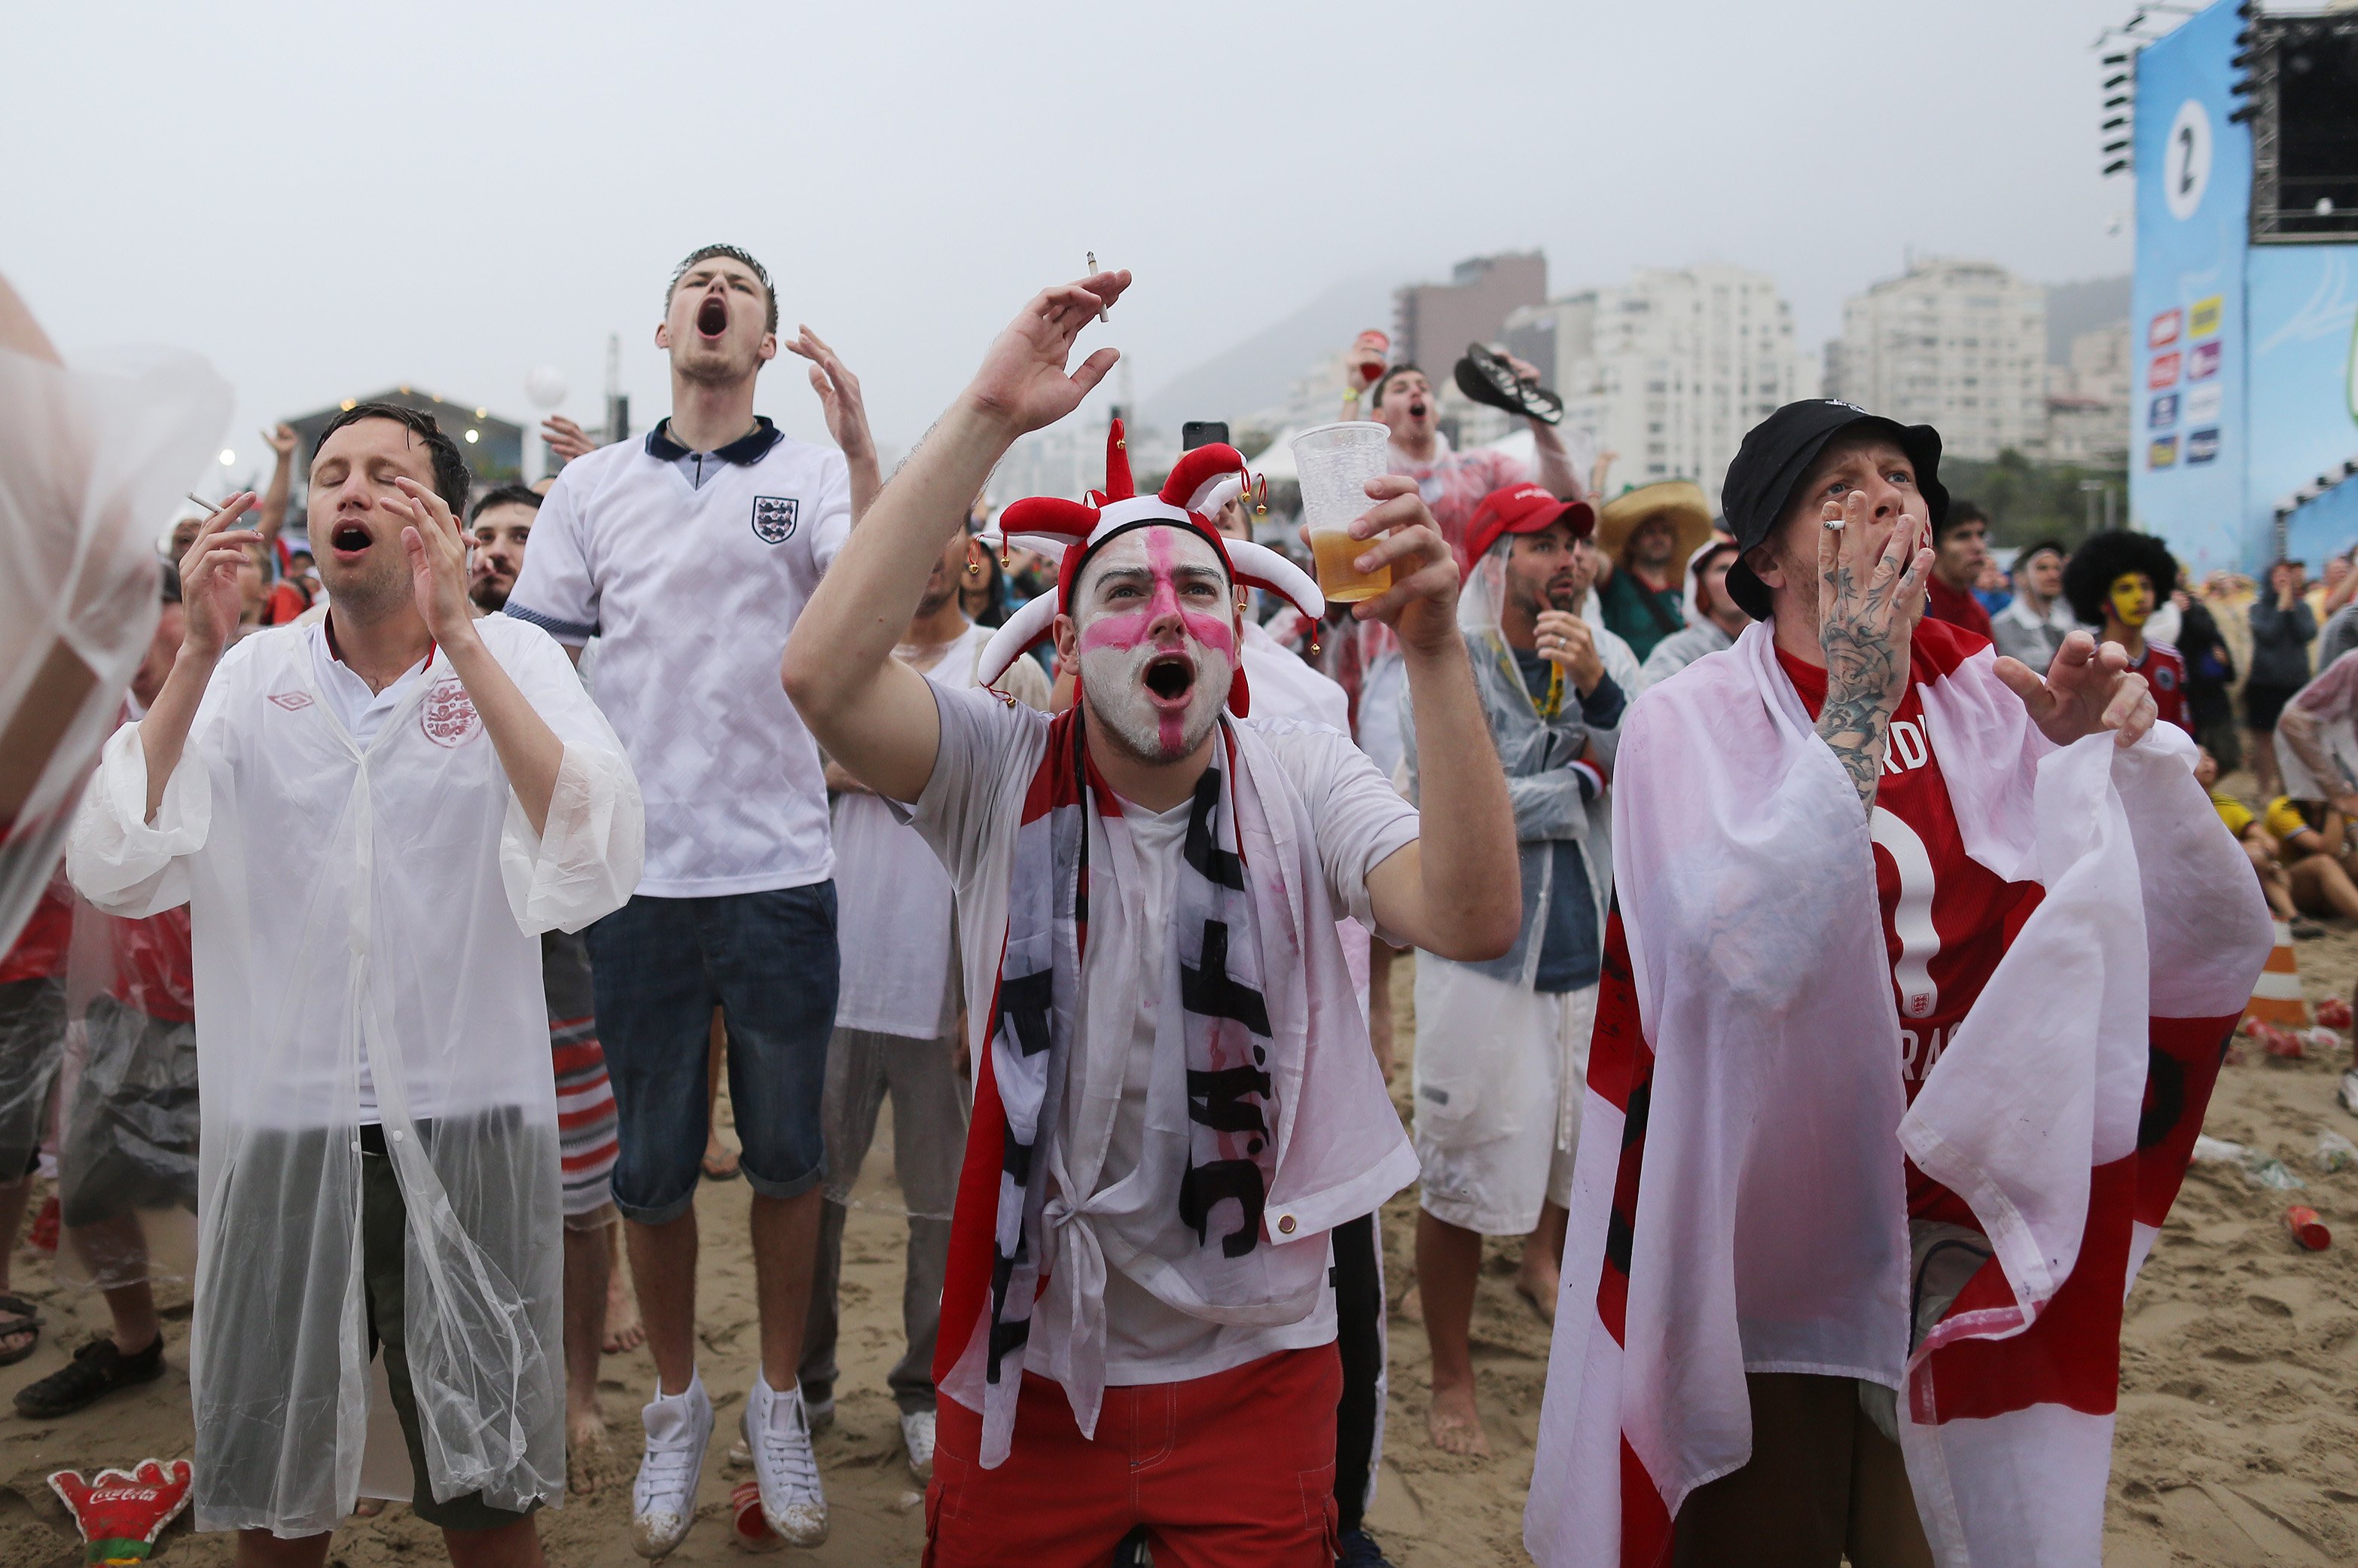 England fans react as they watch a live telecast of the group D match between Uruguay and England, inside the FIFA Fan Fest area on Copacabana beach, in Rio de Janeiro on June 19, 2014.